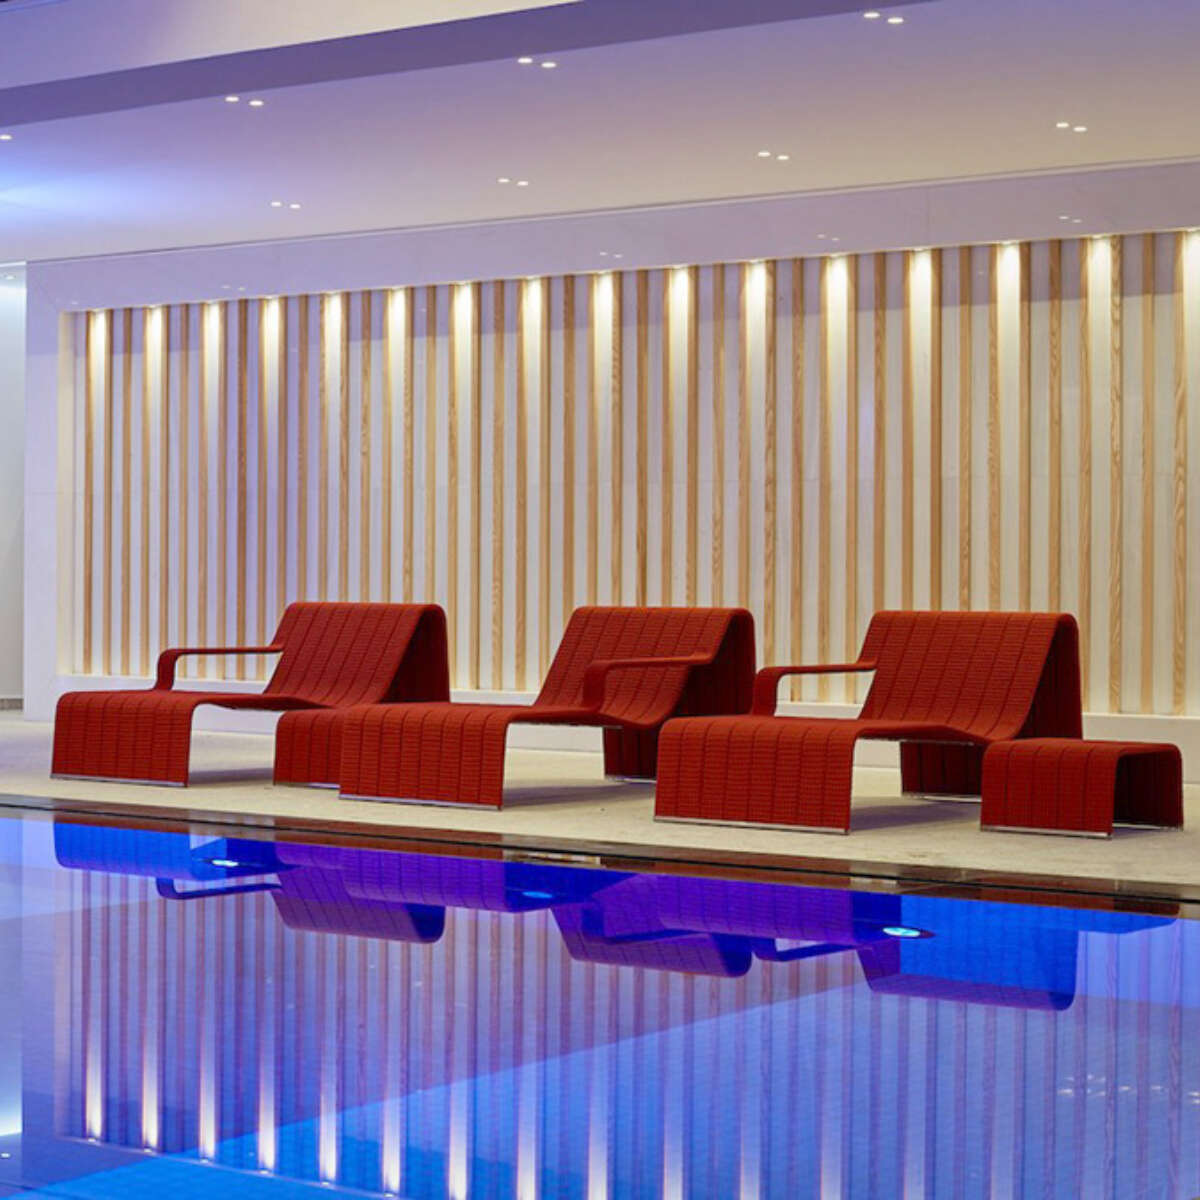 The Modern Garden Co Spa at Park Lane ambient